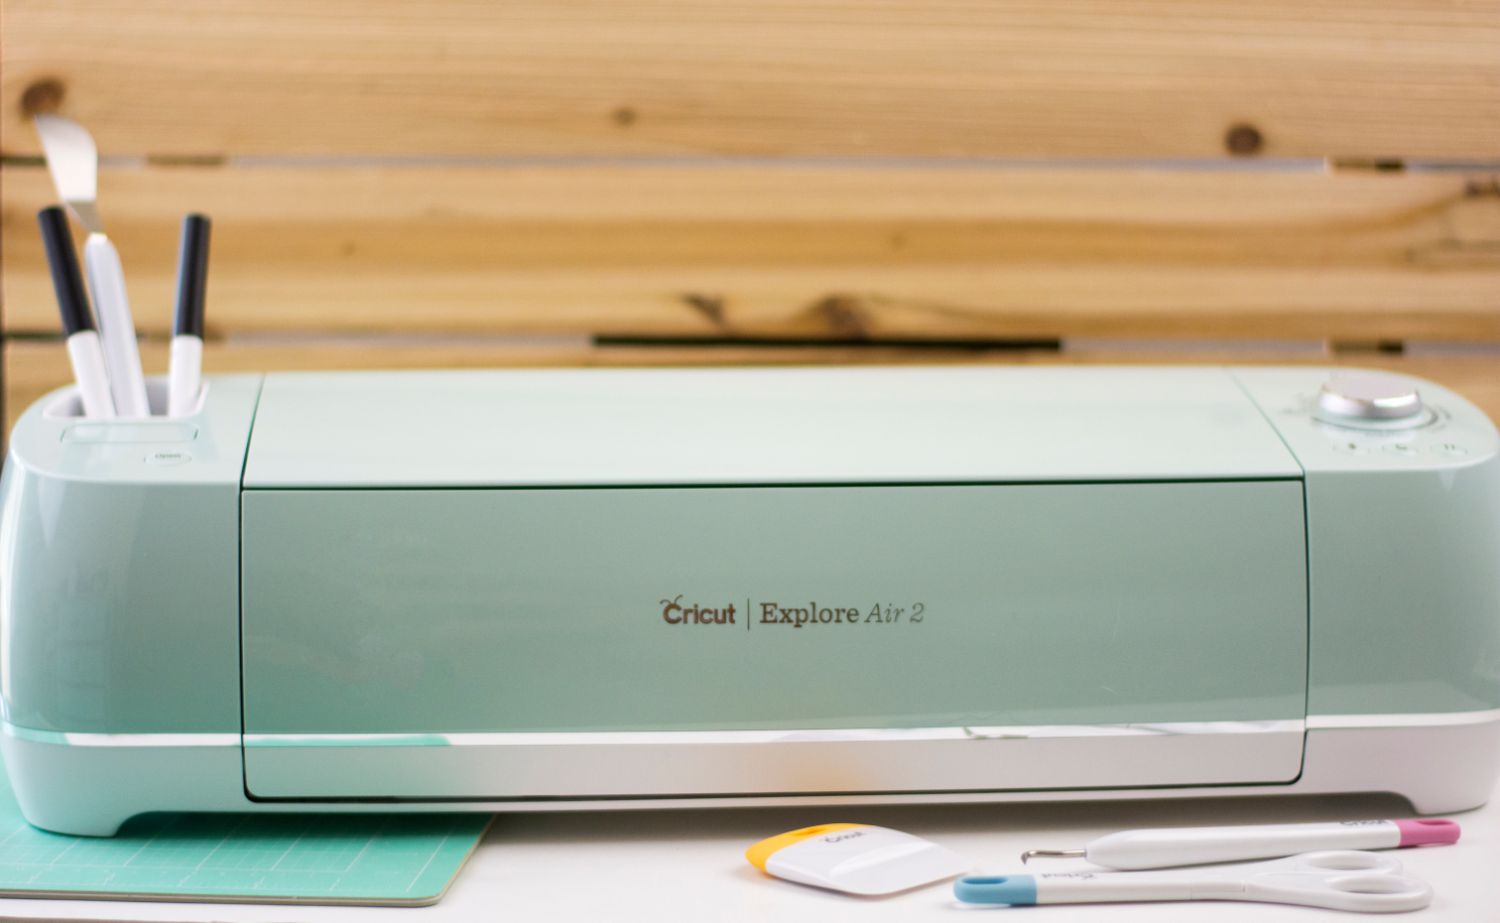 Get to Know the Cricut Explore Air 2.